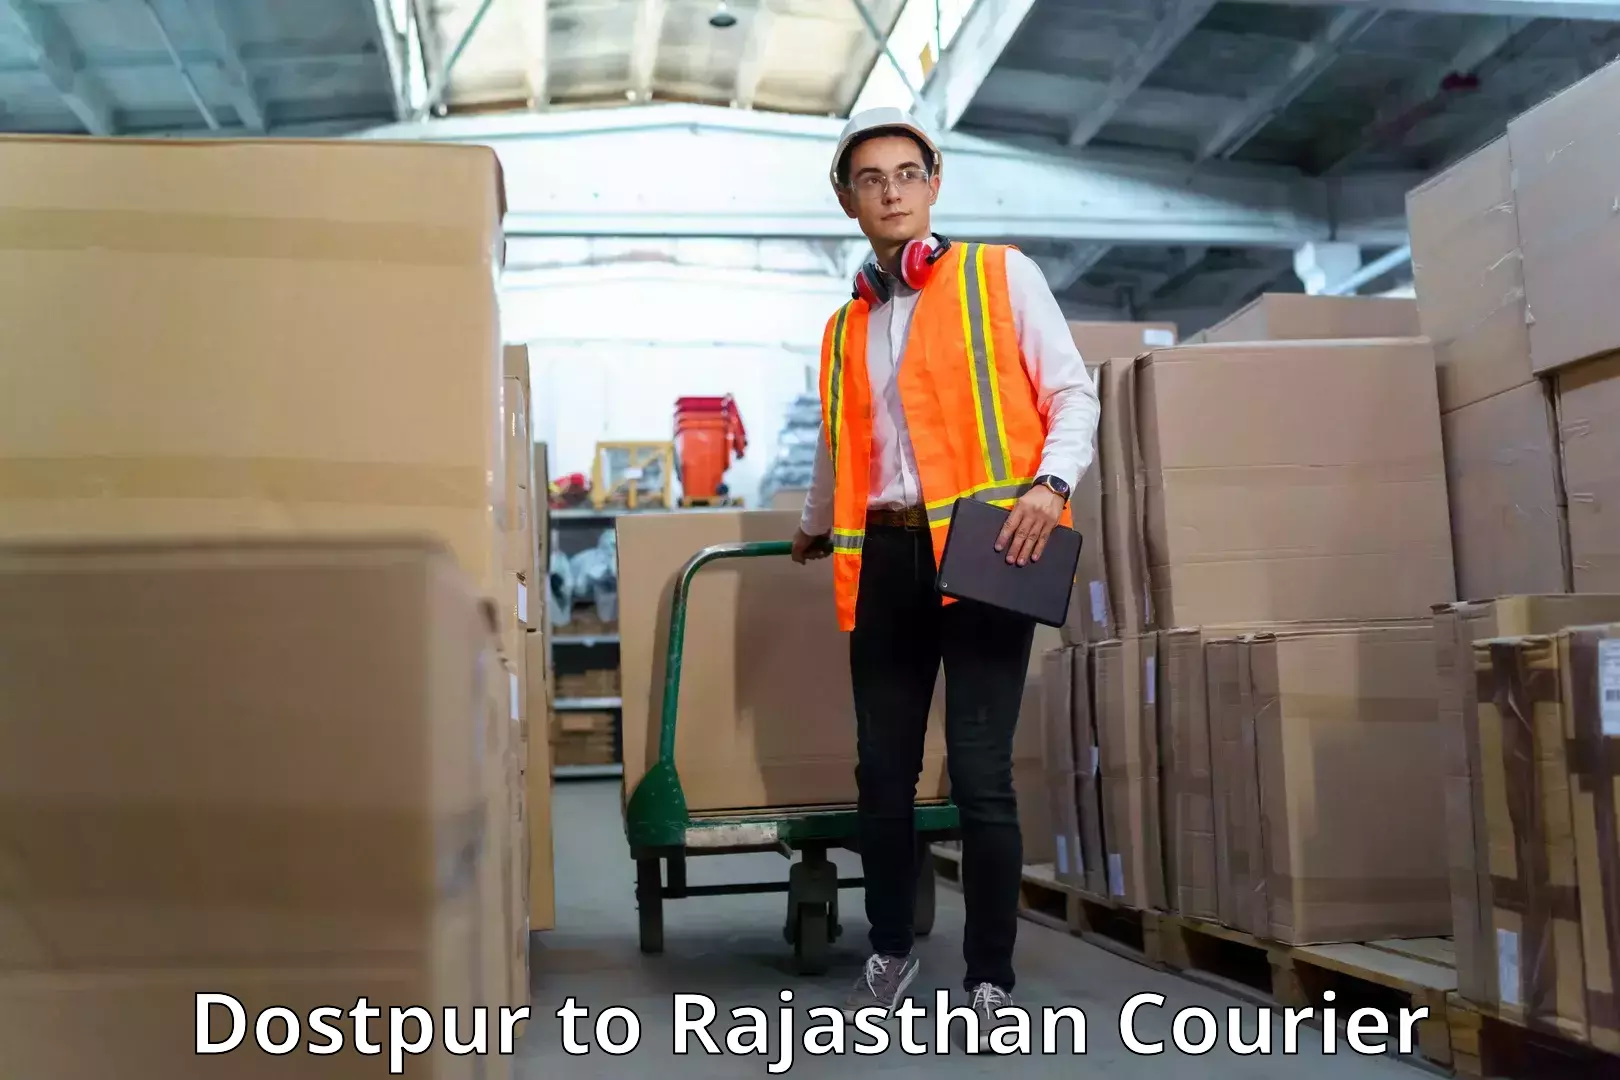 High-capacity parcel service Dostpur to Rajasthan